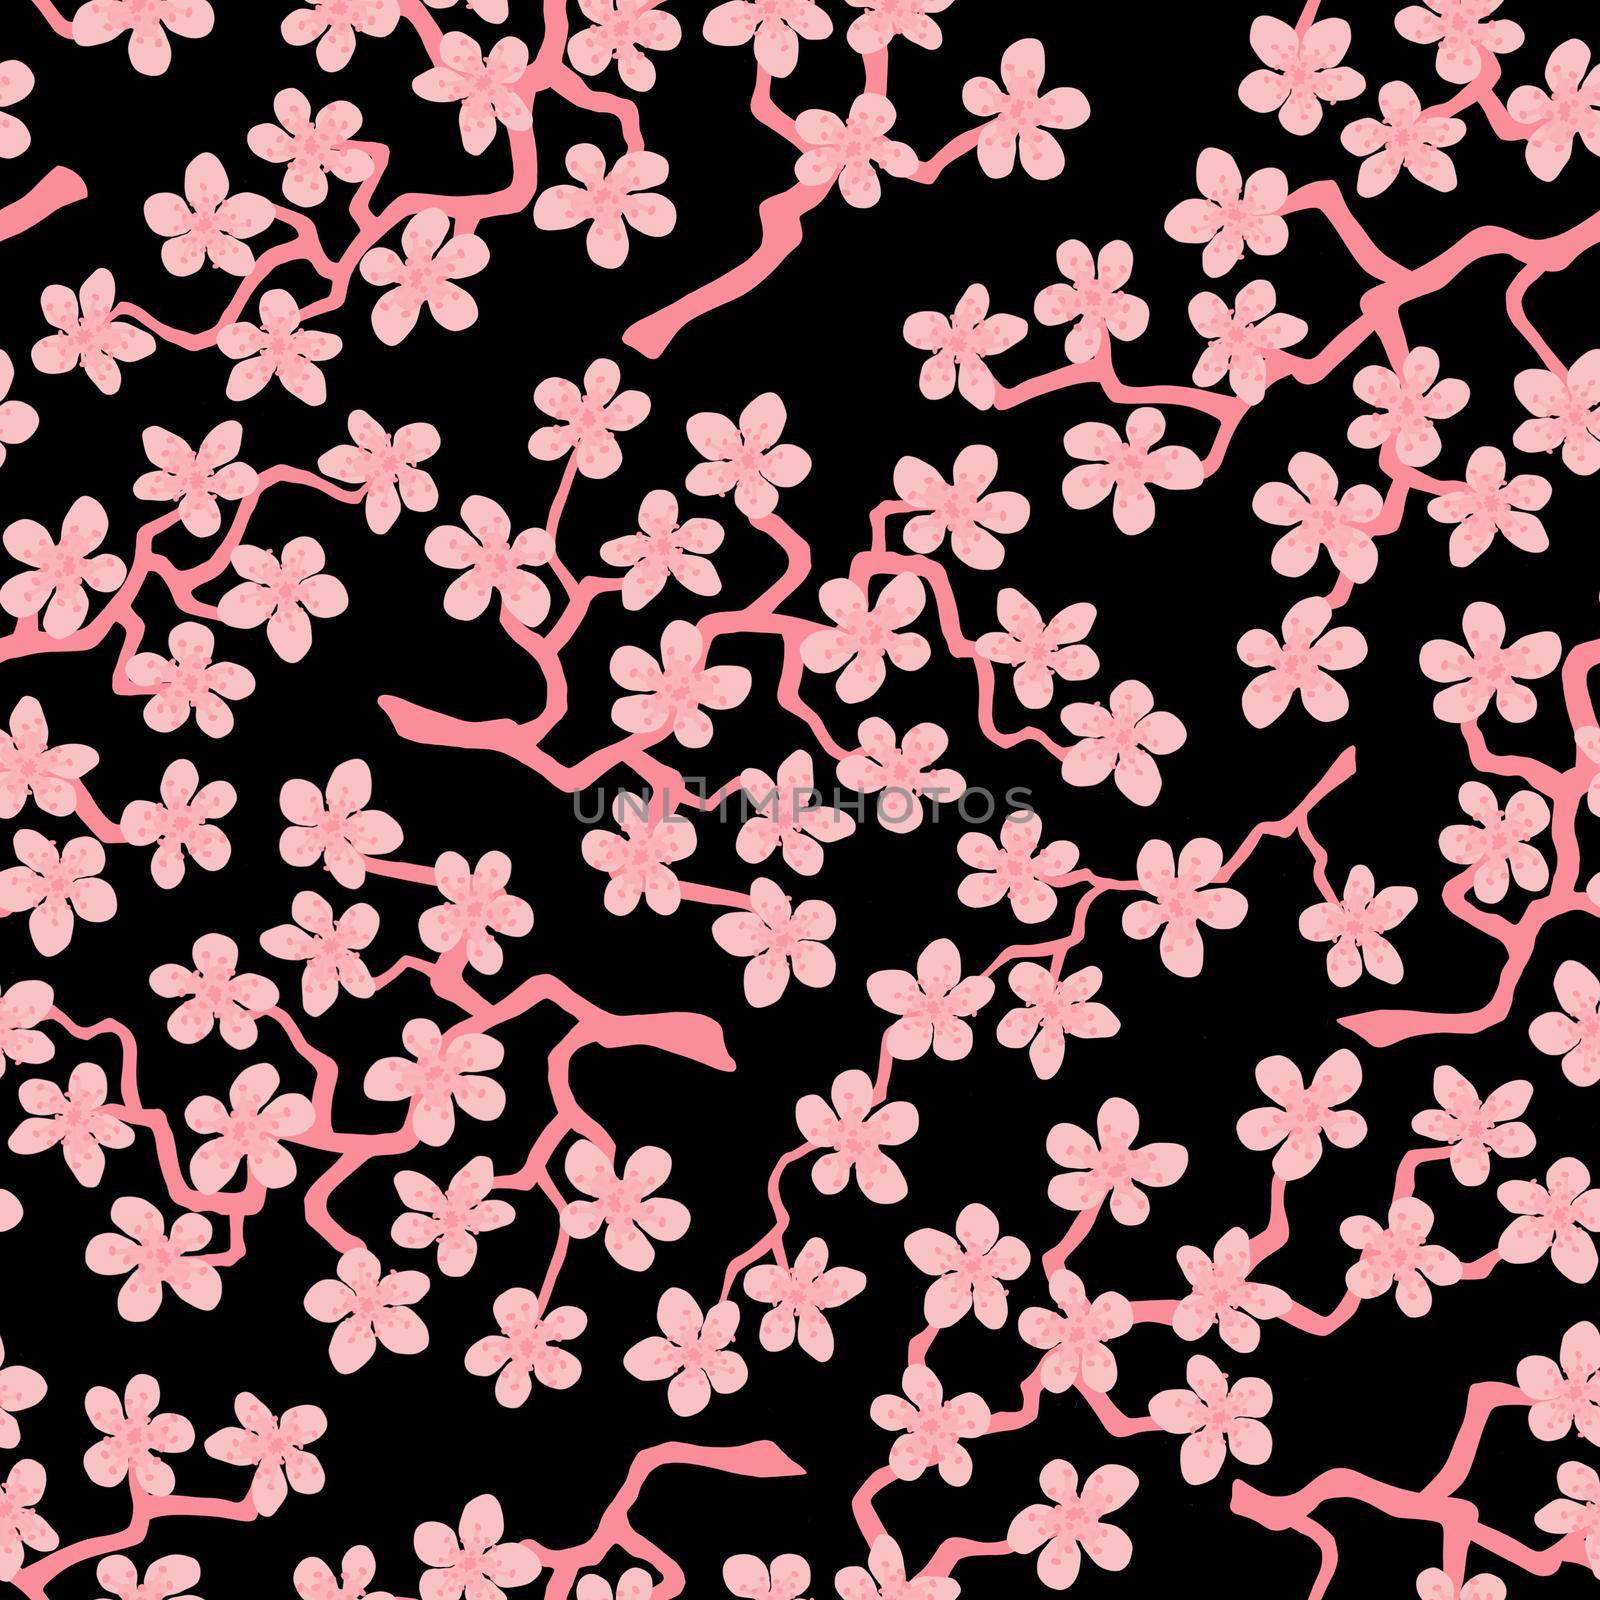 Seamless pattern with blossoming Japanese cherry sakura branches for fabric,packaging,wallpaper,textile decor,design, invitations,cards,print,gift wrap,manufacturing.Pink flowers on black background